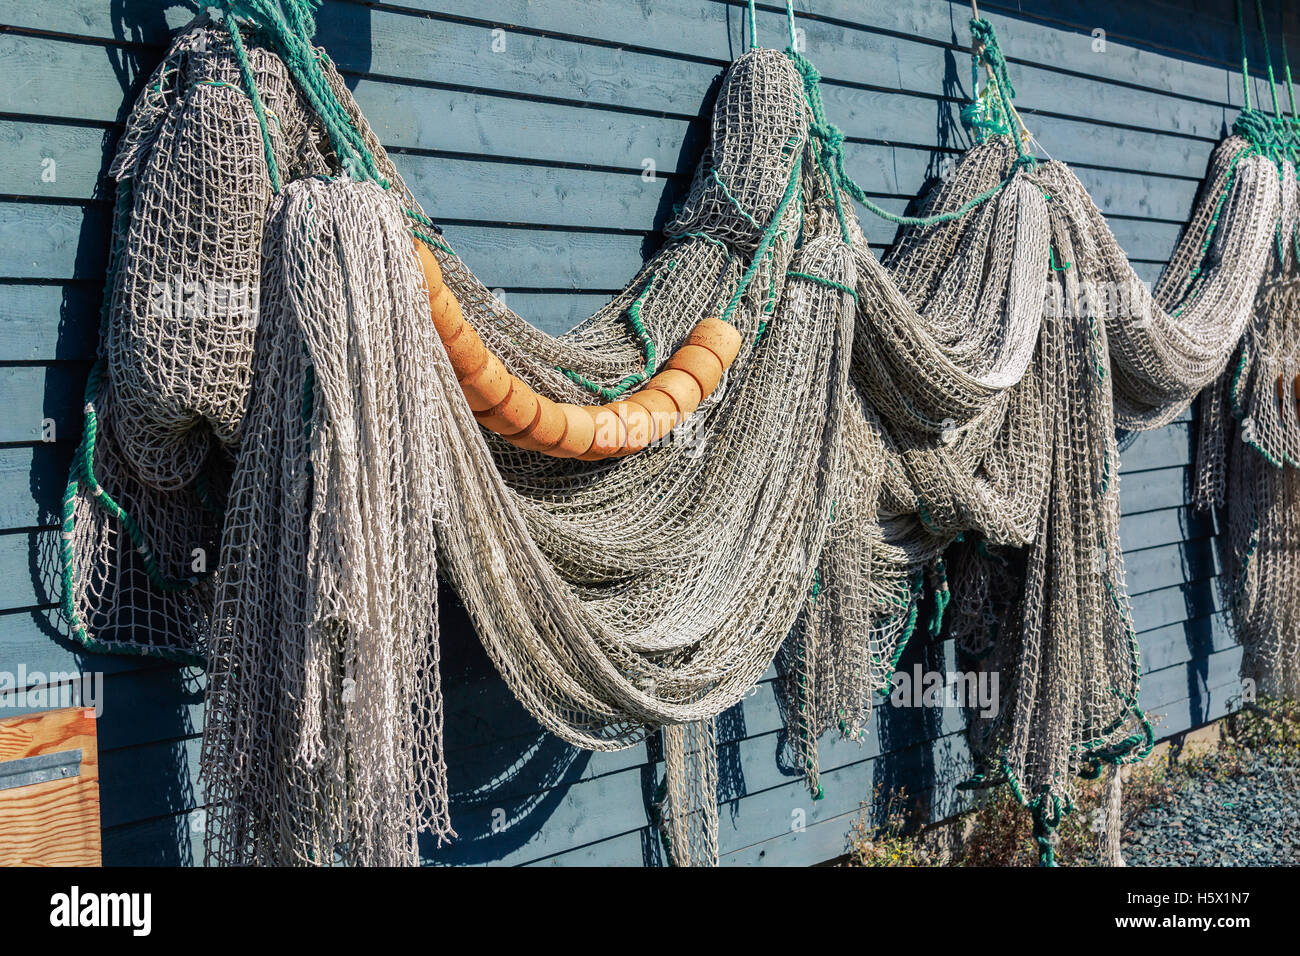 Newfoundland fish net and buoys hanging on a rustic wall. Stock Photo